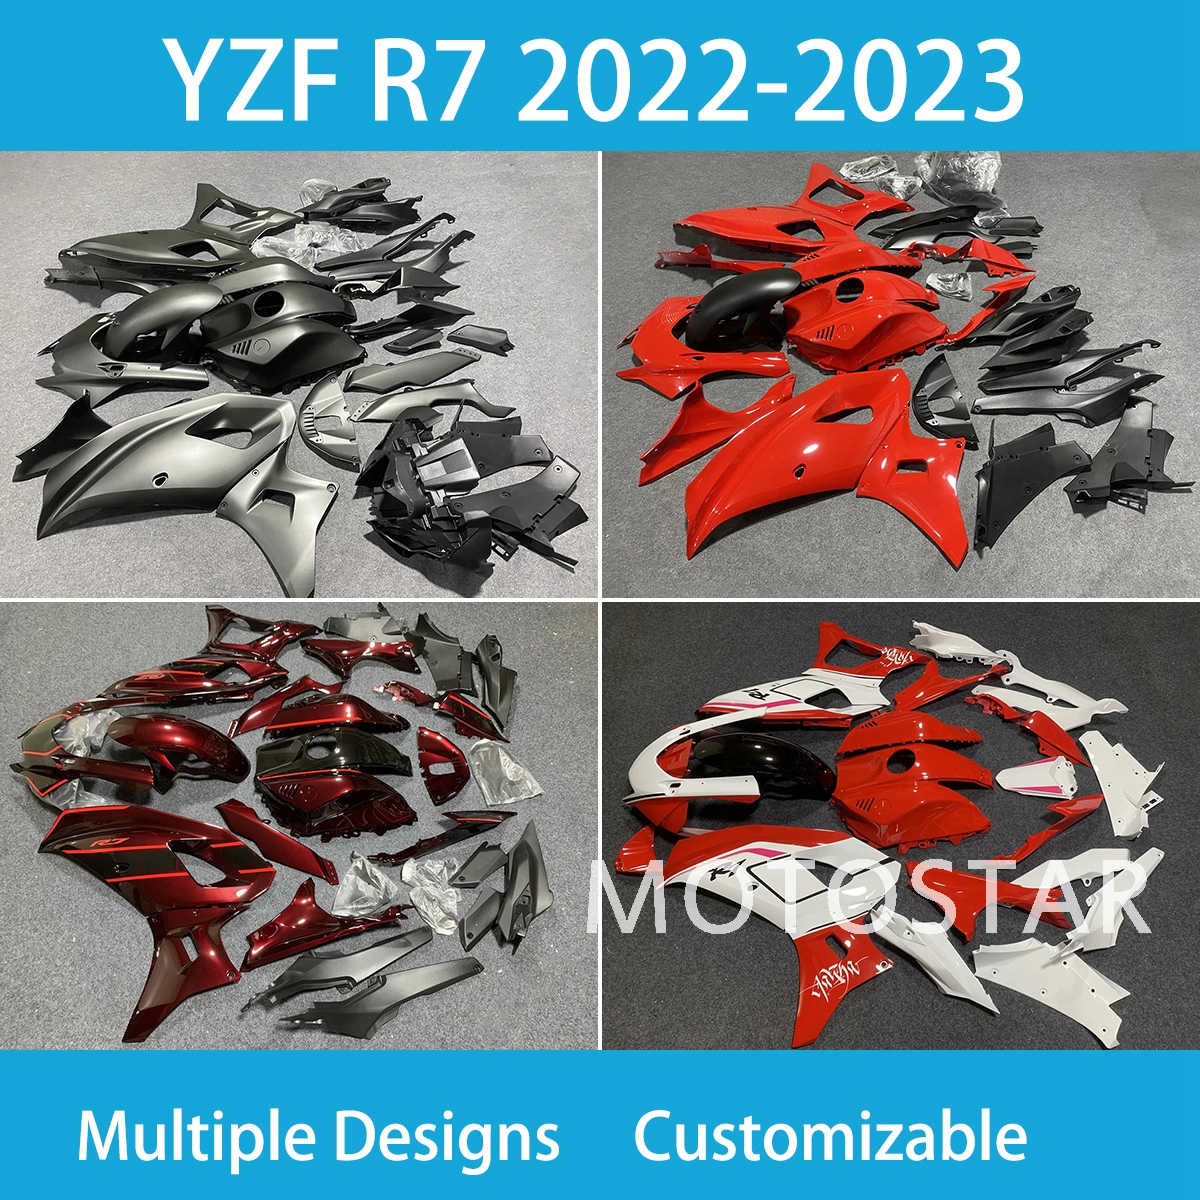 Free Custom YZFR7 2022 2023 Year Fairing for Yamaha YZF R7 22 23 Year Injection Molded Cowling Motorcycle Whole Fairings Set YEAR ABS Plastic Road Racing Bodywork